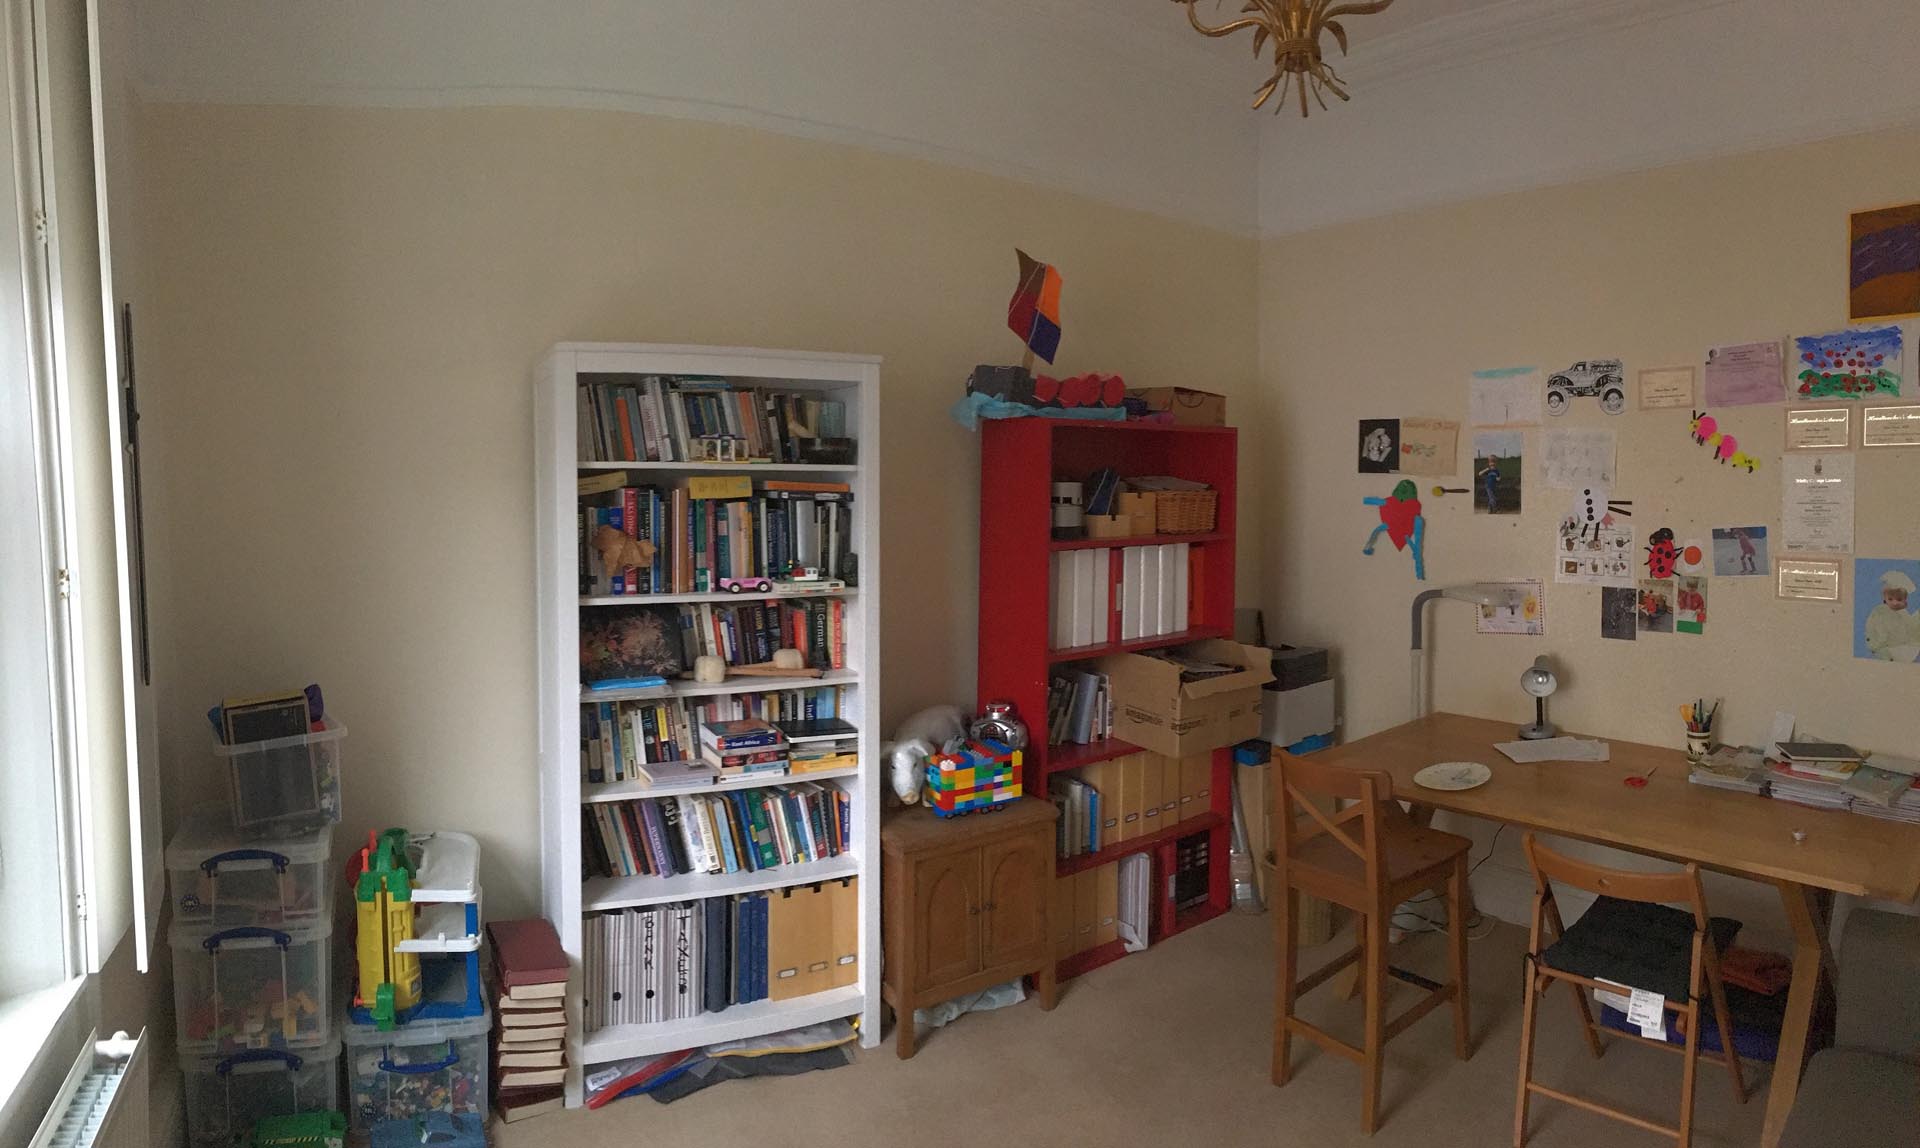 Before photo - A home school room.